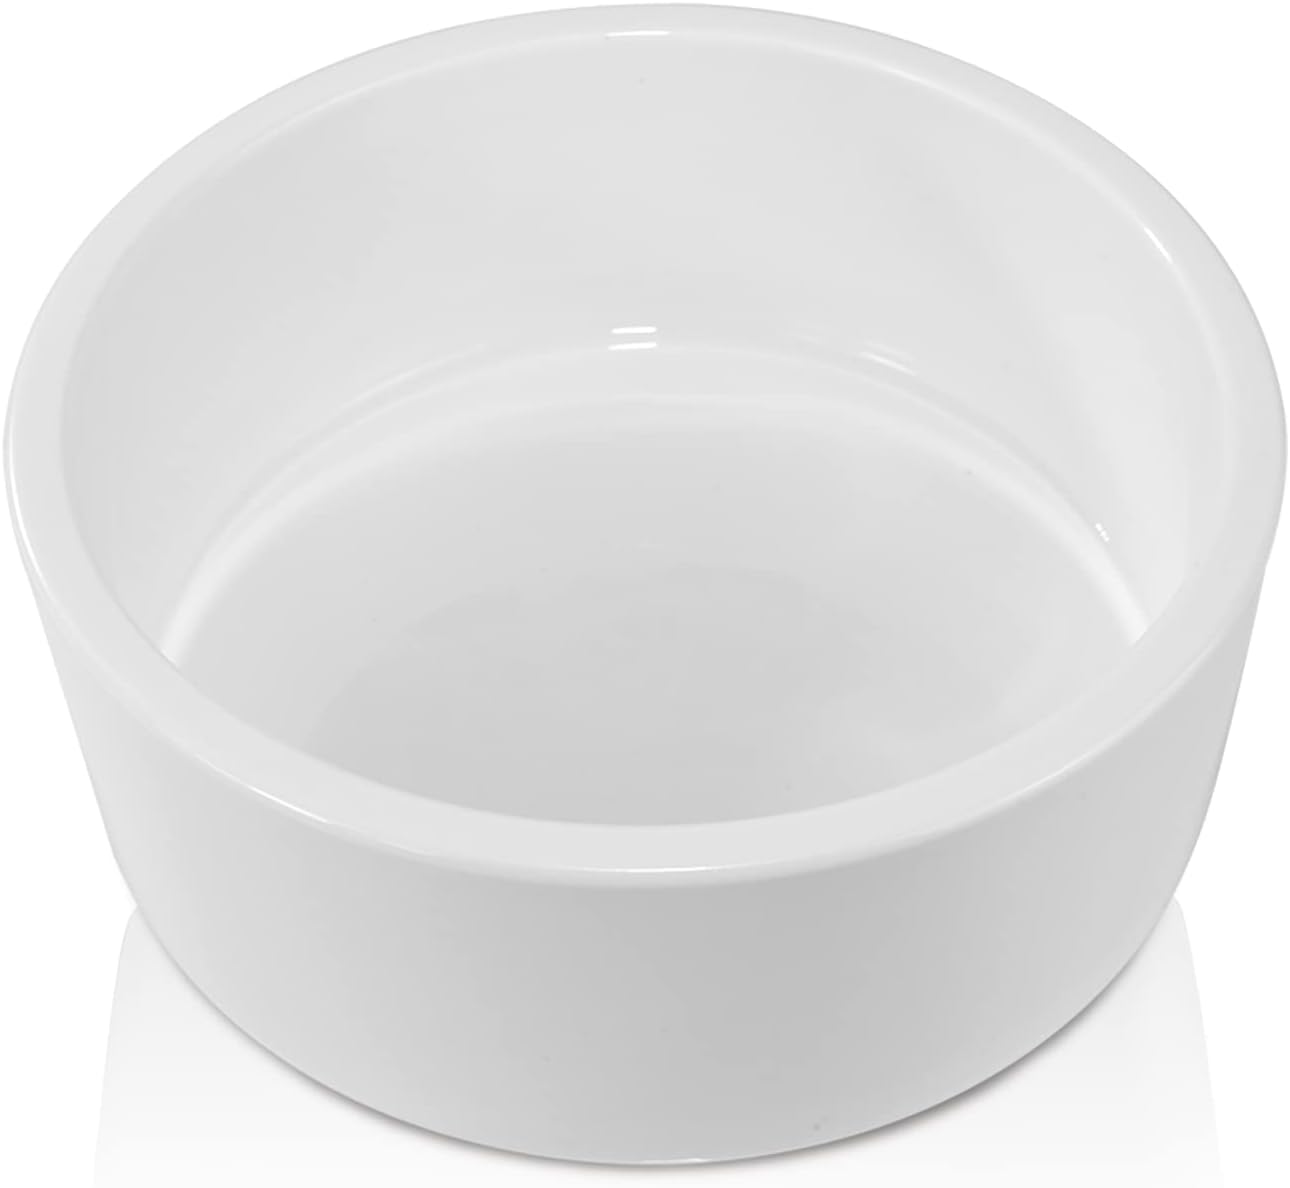 18-PACK-Small Sublimation Pet bowl 4.9 x 2.8 inches with AAA Coating -  | Reinforced Styrofoam Packaging"